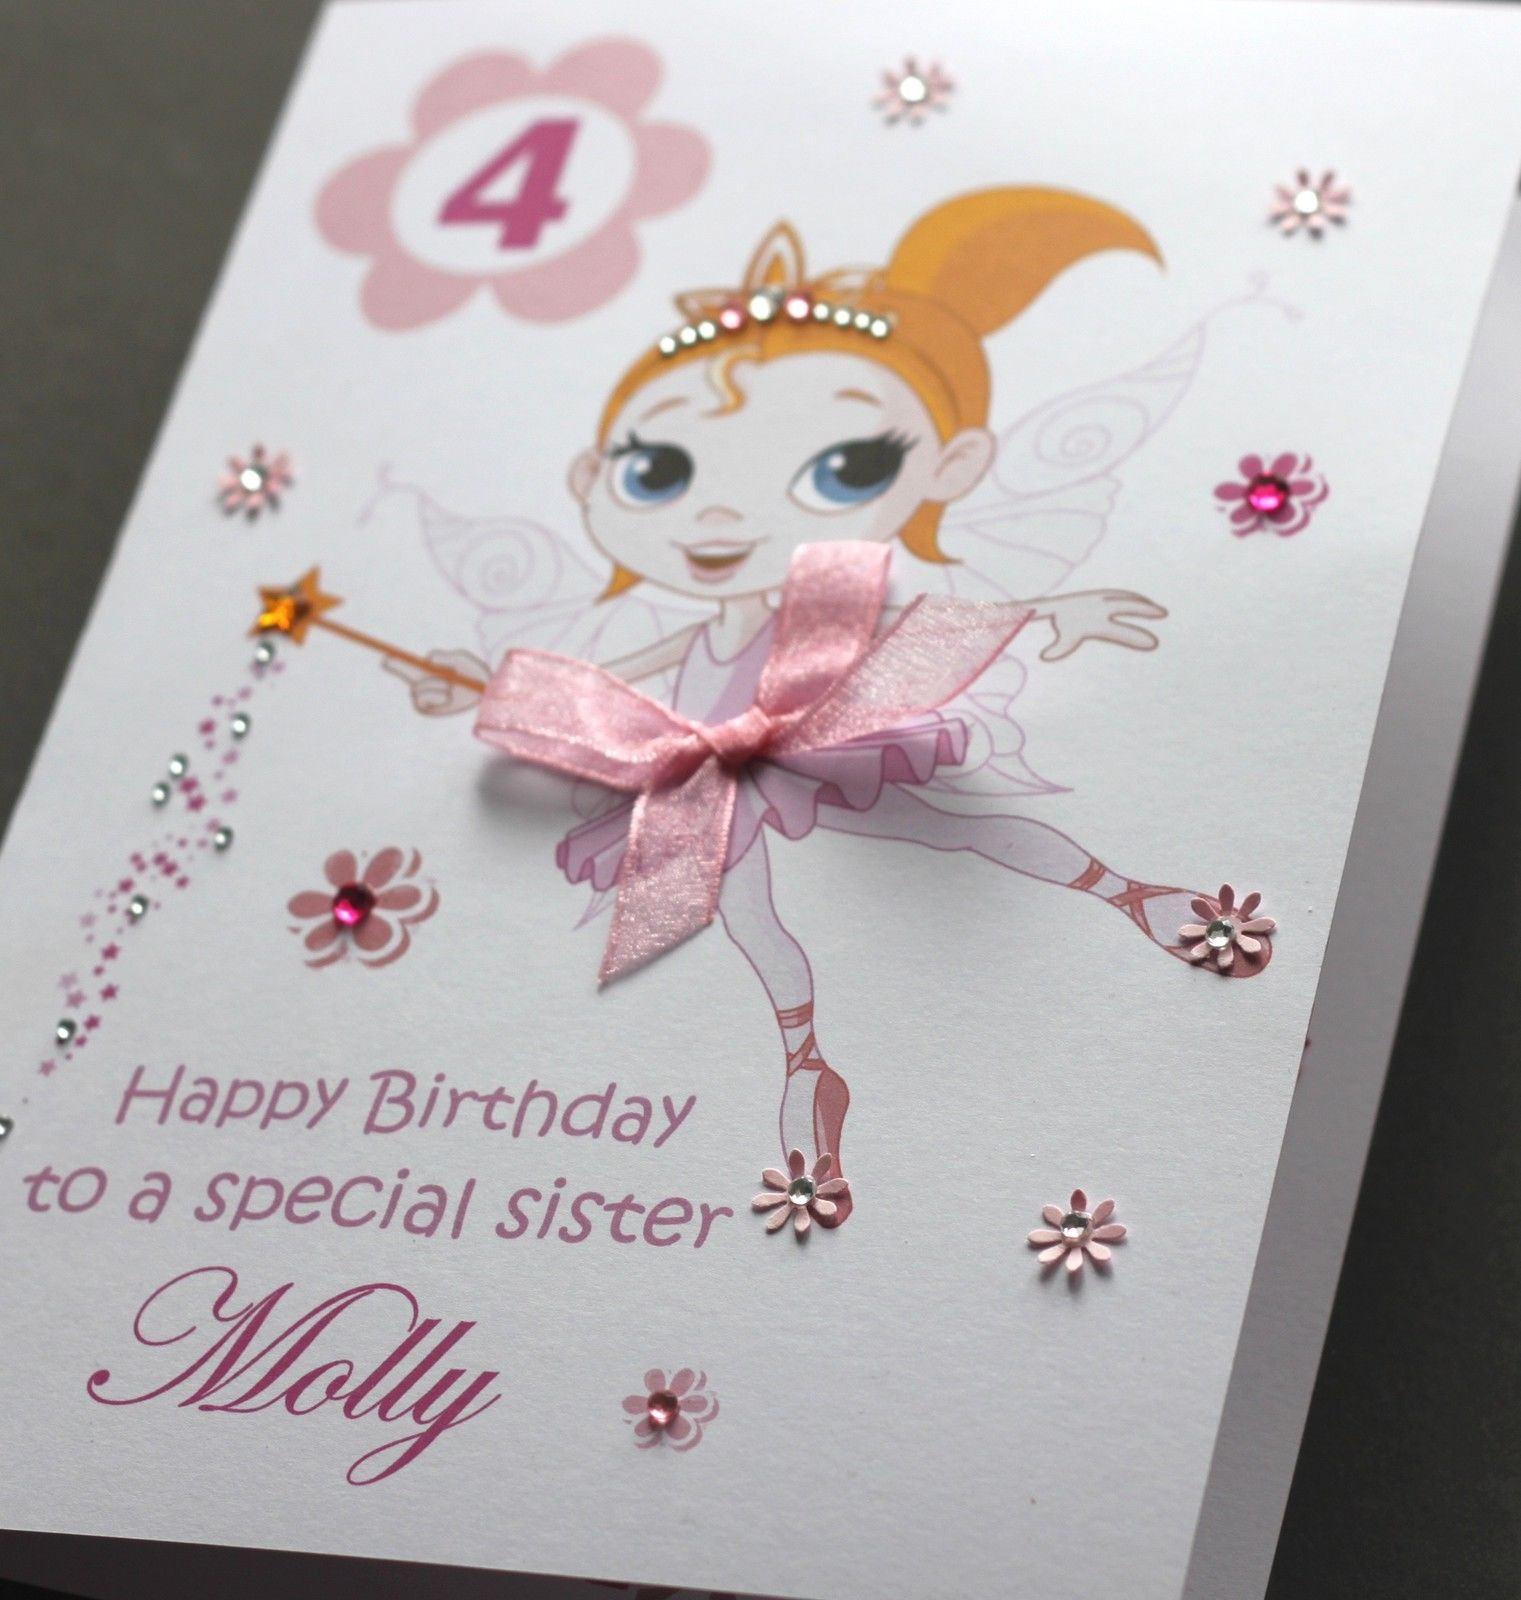 Homemade Birthday Card Ideas For Friends Handmade Birthday Card Ideas For Daughter Line Birthday Greeting